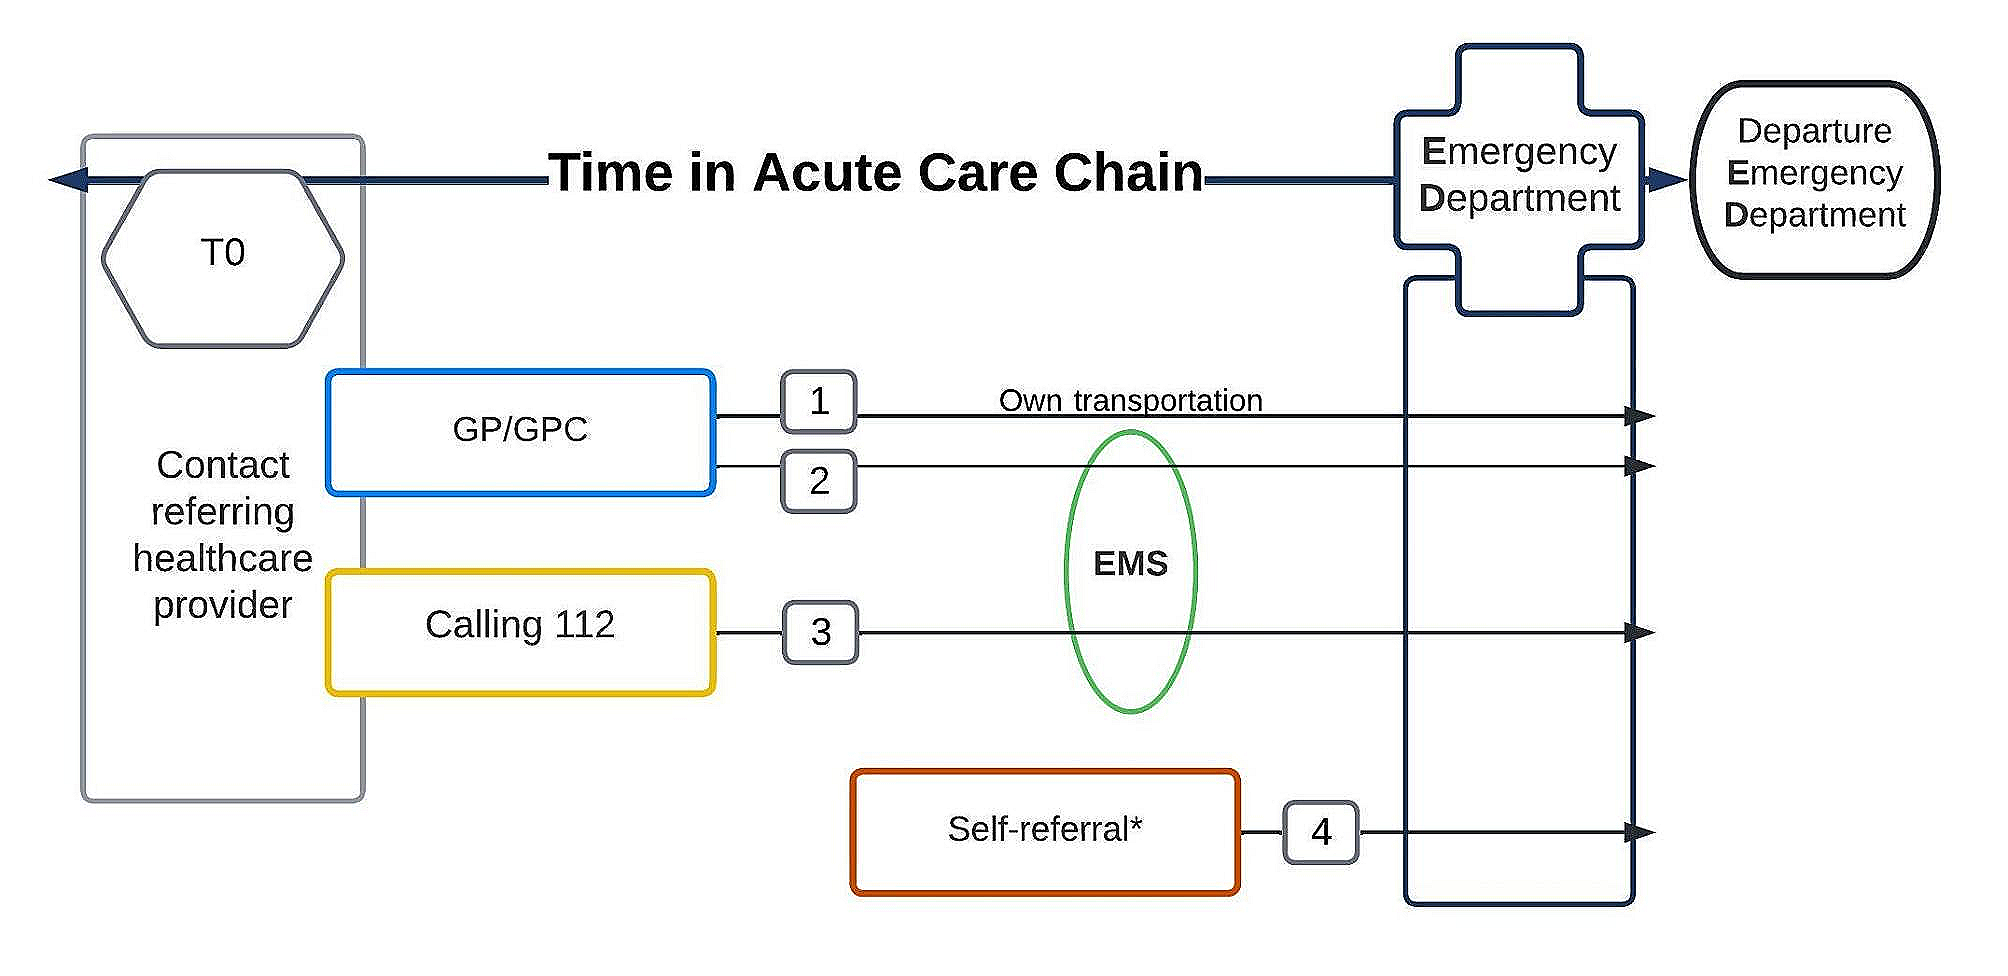 From symptom onset to ED departure: understanding the acute care chain for patients with undifferentiated complaints: a prospective observational study